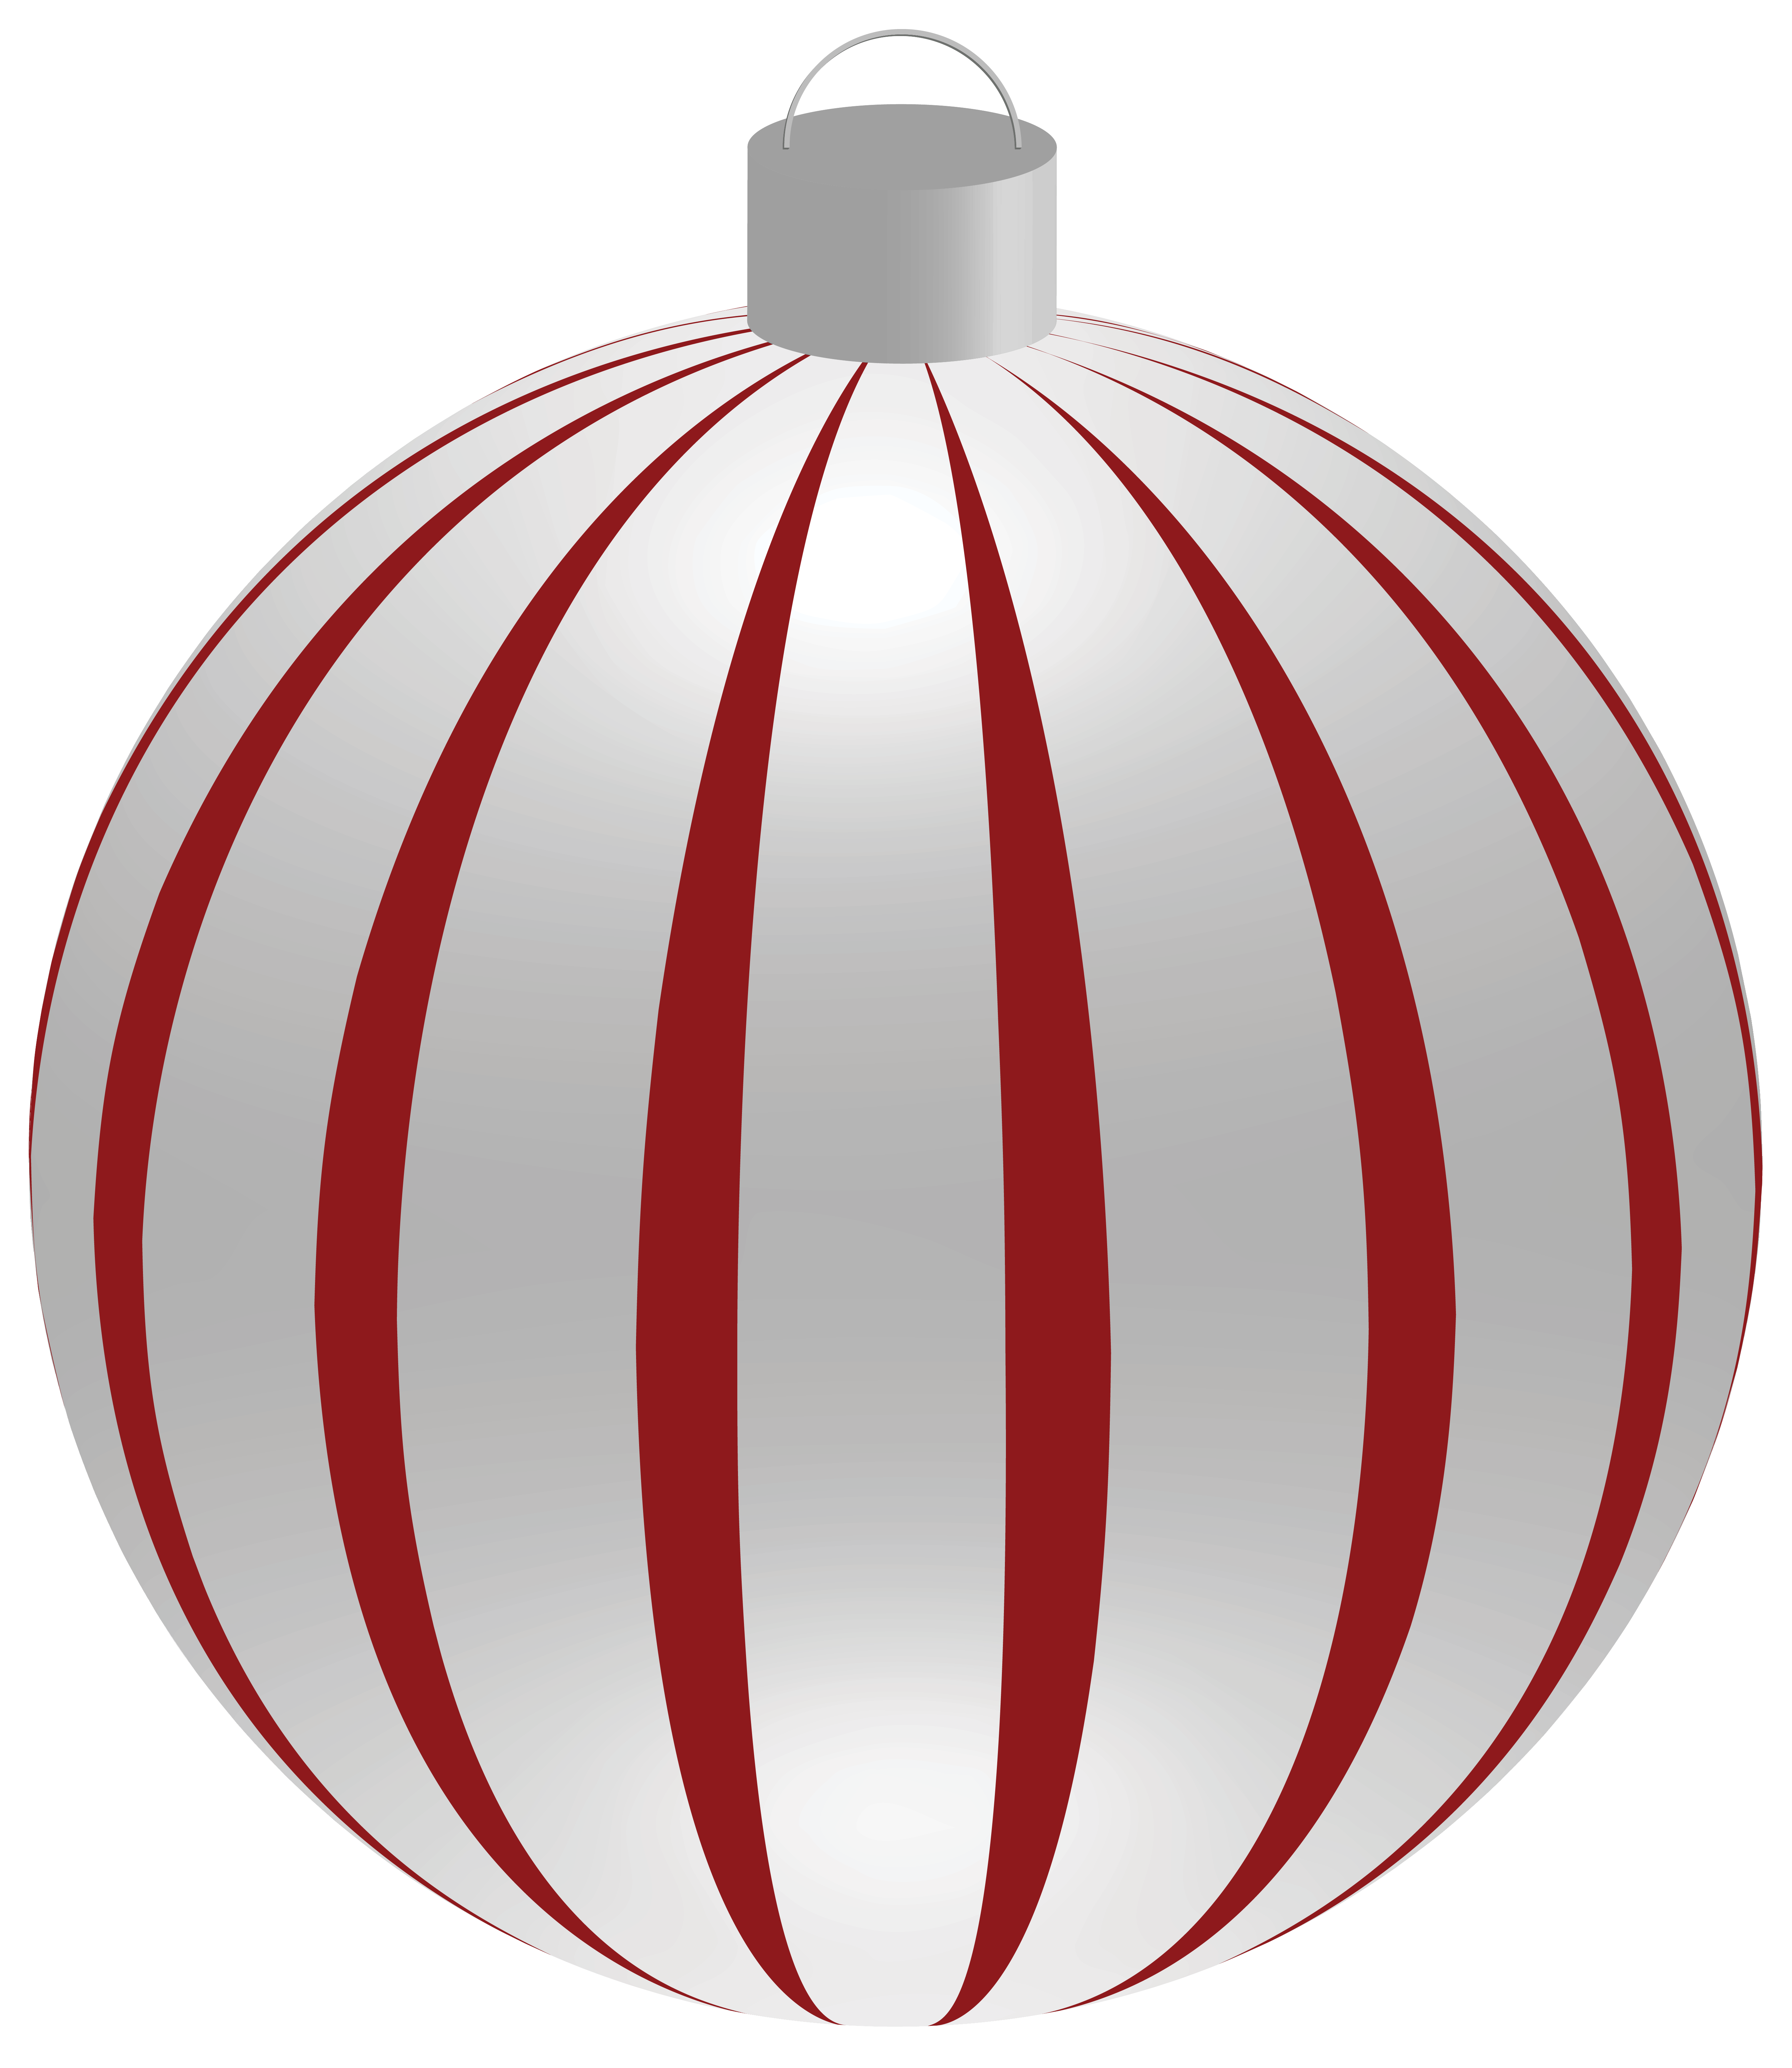 Striped christmas with png. Ornaments clipart ball